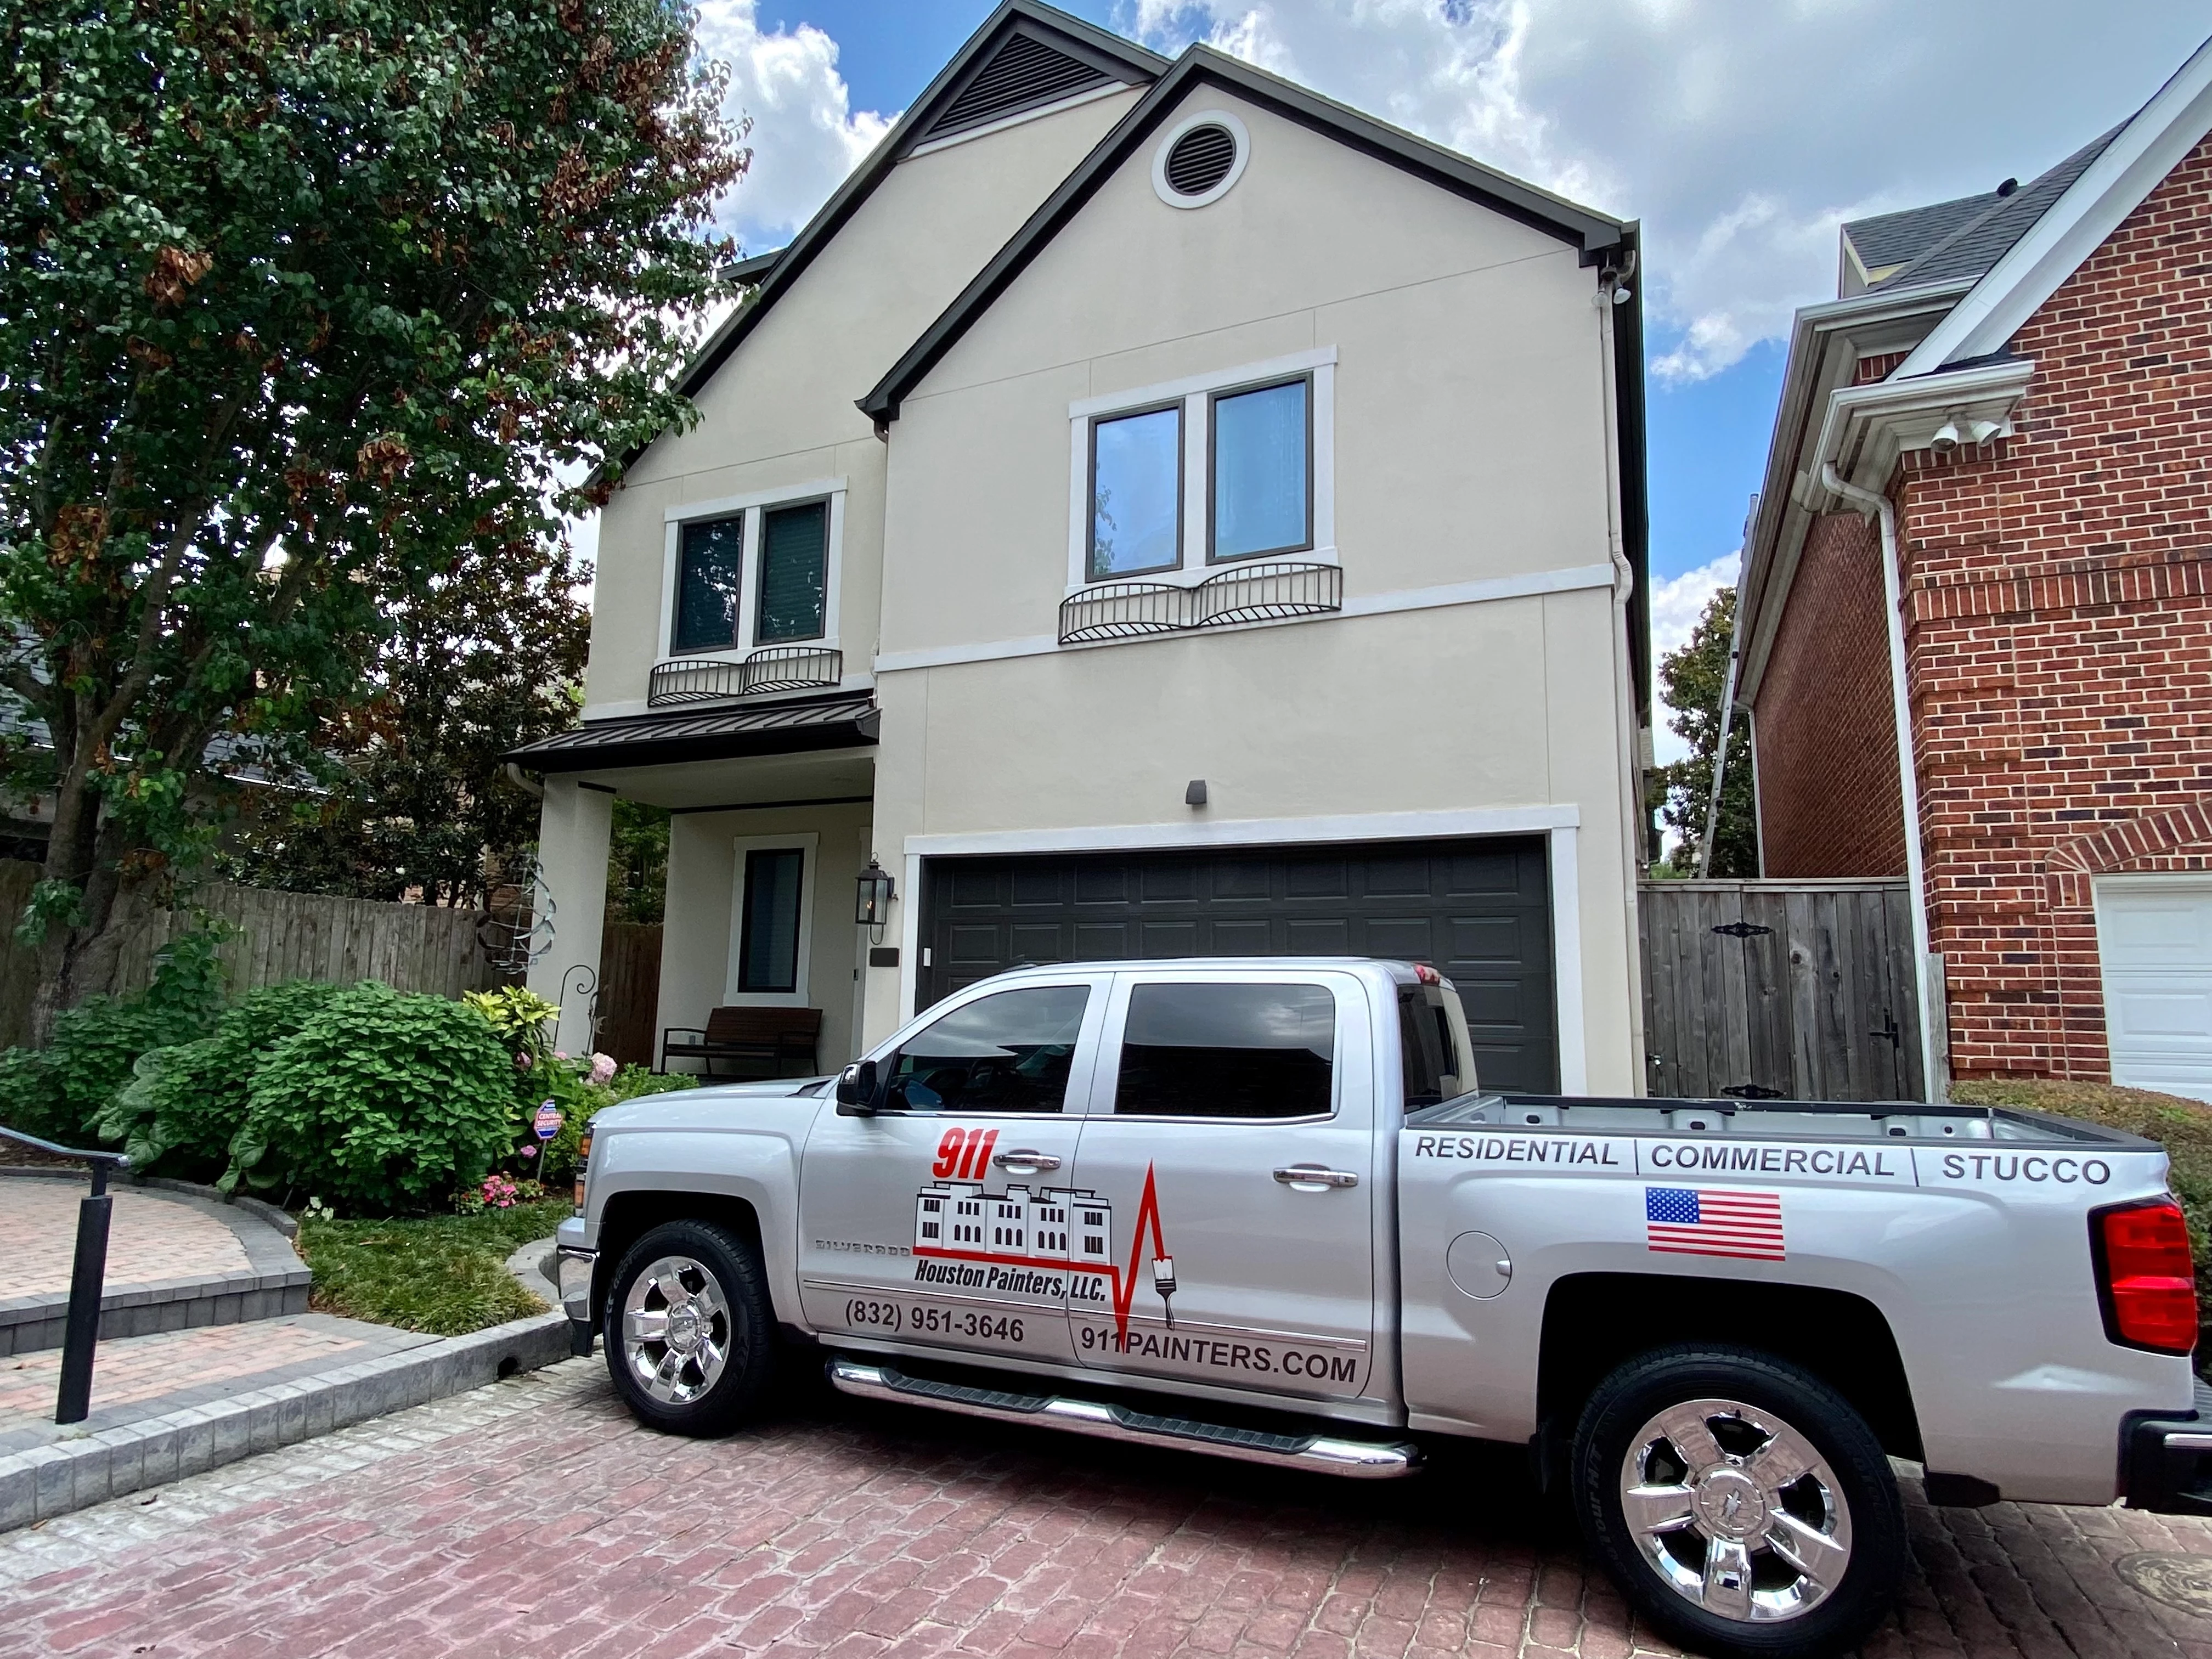 911 Houston Painters, LLC team in Houston, TX - people or person